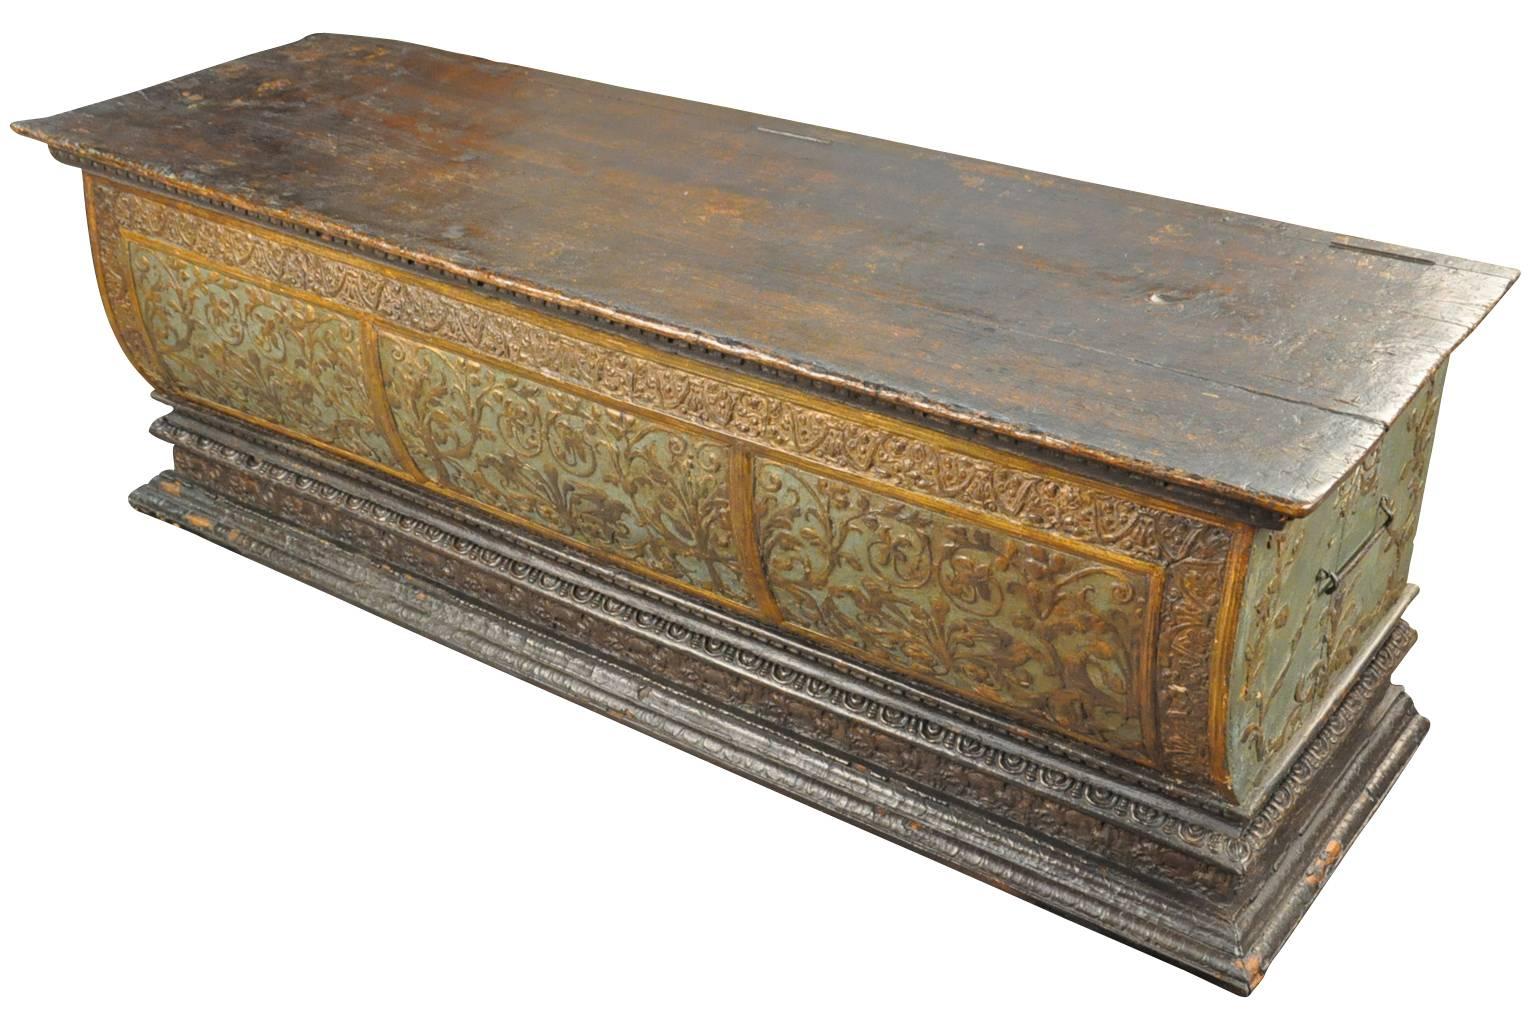 An exquisite 18th century Italian Baroque cassone or trunk from Northern Italy. Expertly polychromed and carved with a flowering vine motif. Fabulous patina. A stunning piece to place at the foot of a bed or in any living area.